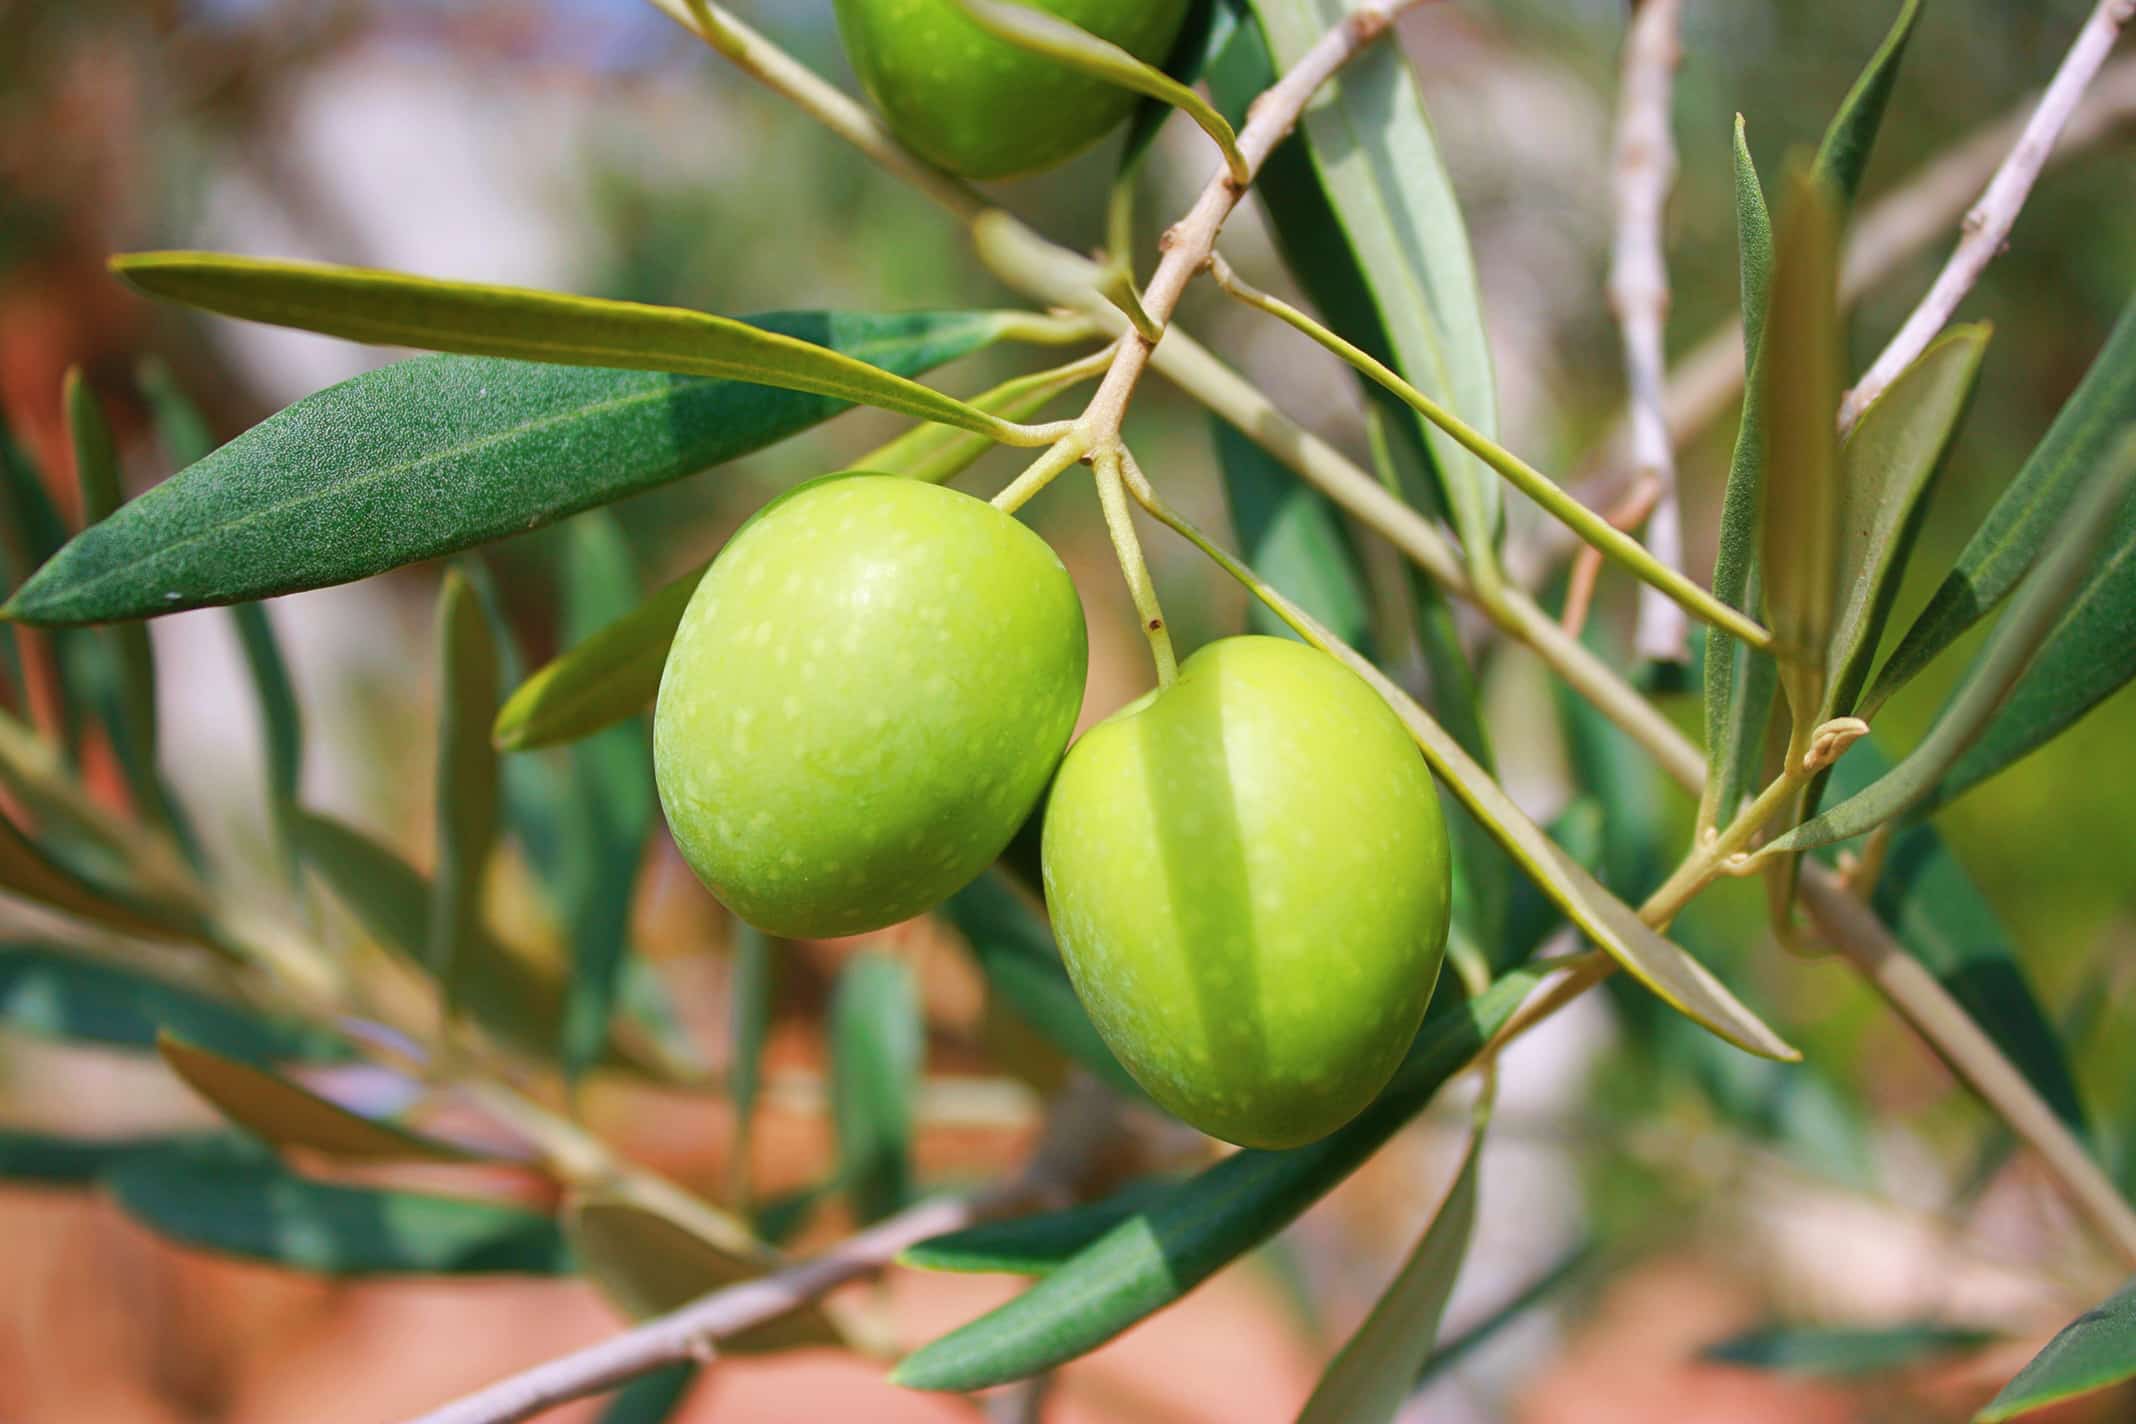 Olive figs hanging from a branch